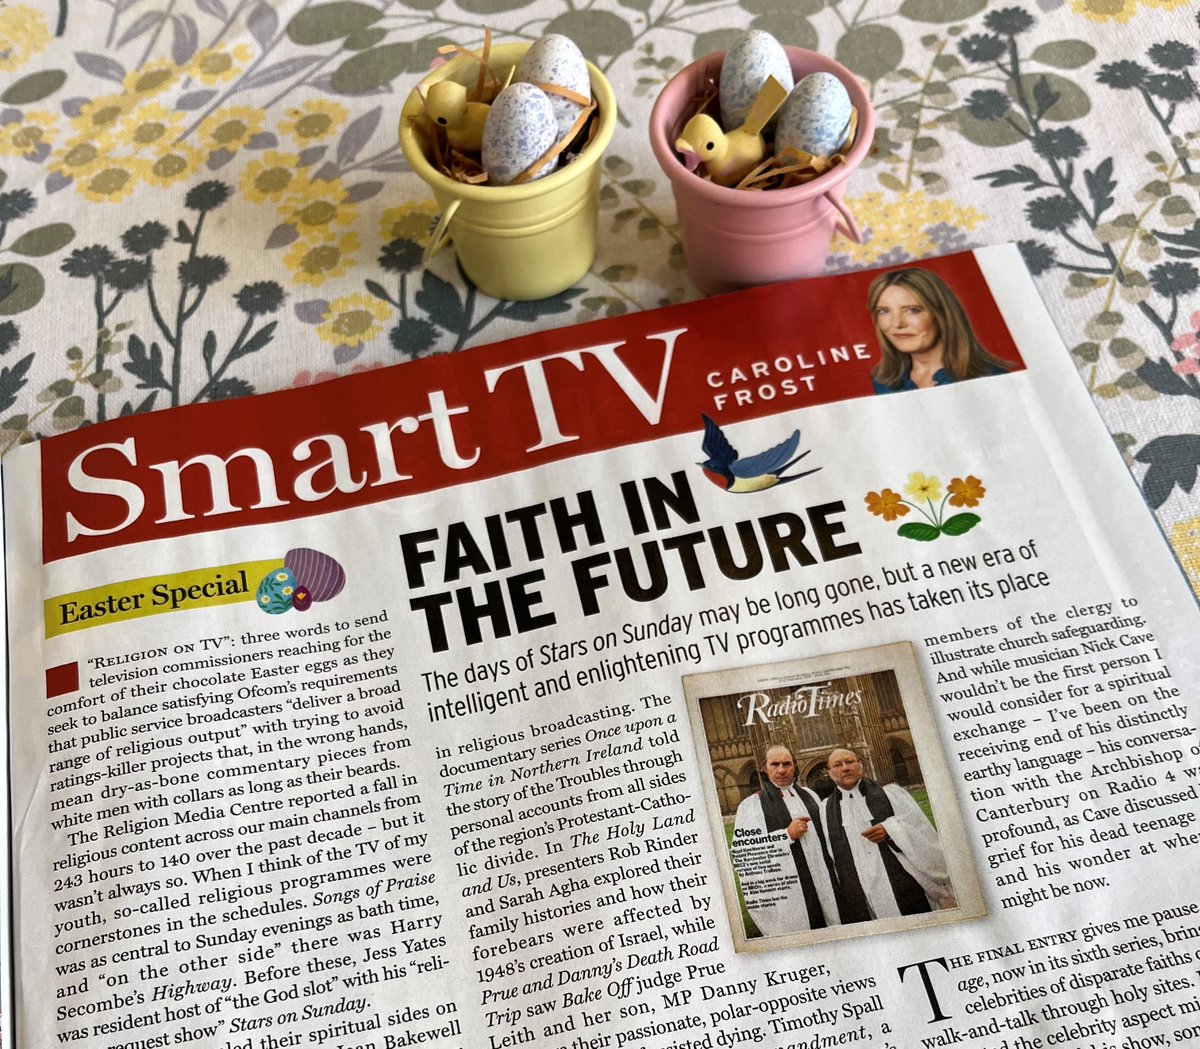 The days of ‘Stars on Sunday’ may be long gone, but a new era of intelligent and enlightening TV programmes has taken its place - read our latest blog 'Faith in the Future' first published in @RadioTimes sandfordawards.org.uk/faith-in-the-f…